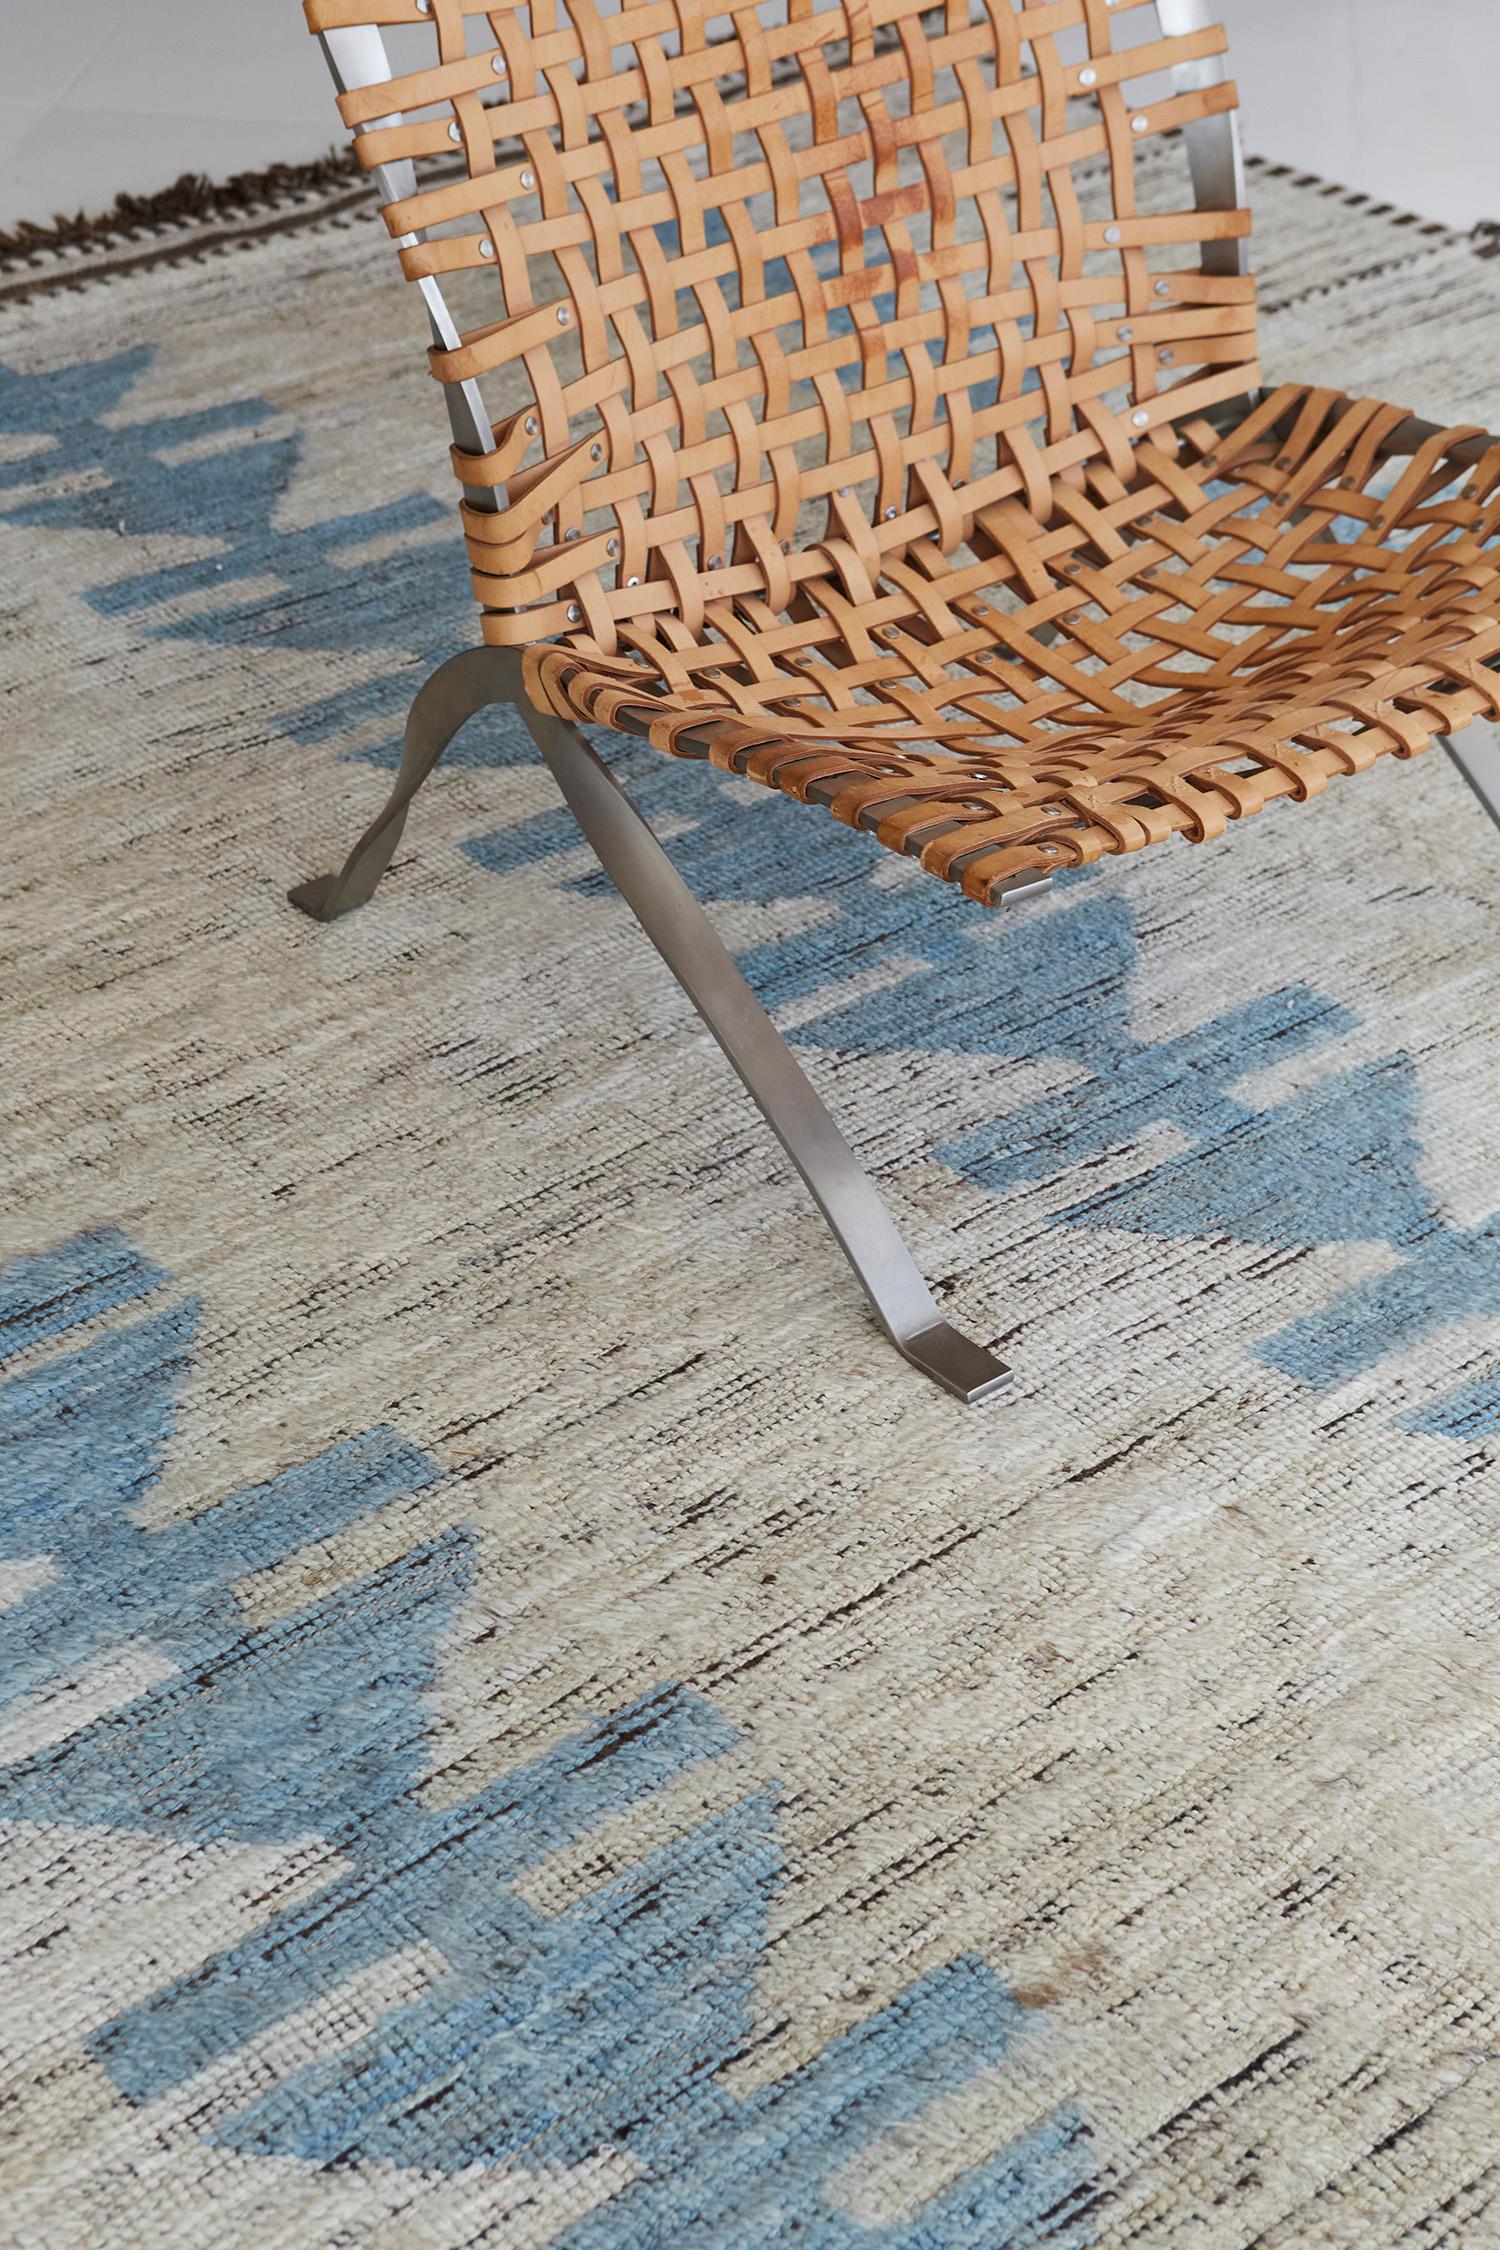 The 'Borlange' rug is a handwoven wool piece inspired by vintage Scandinavian design elements and recreated for the modern design world. The rug's shag balance and harmony, handwoven with an ivory flat weave and unique piles of tortoise blue,